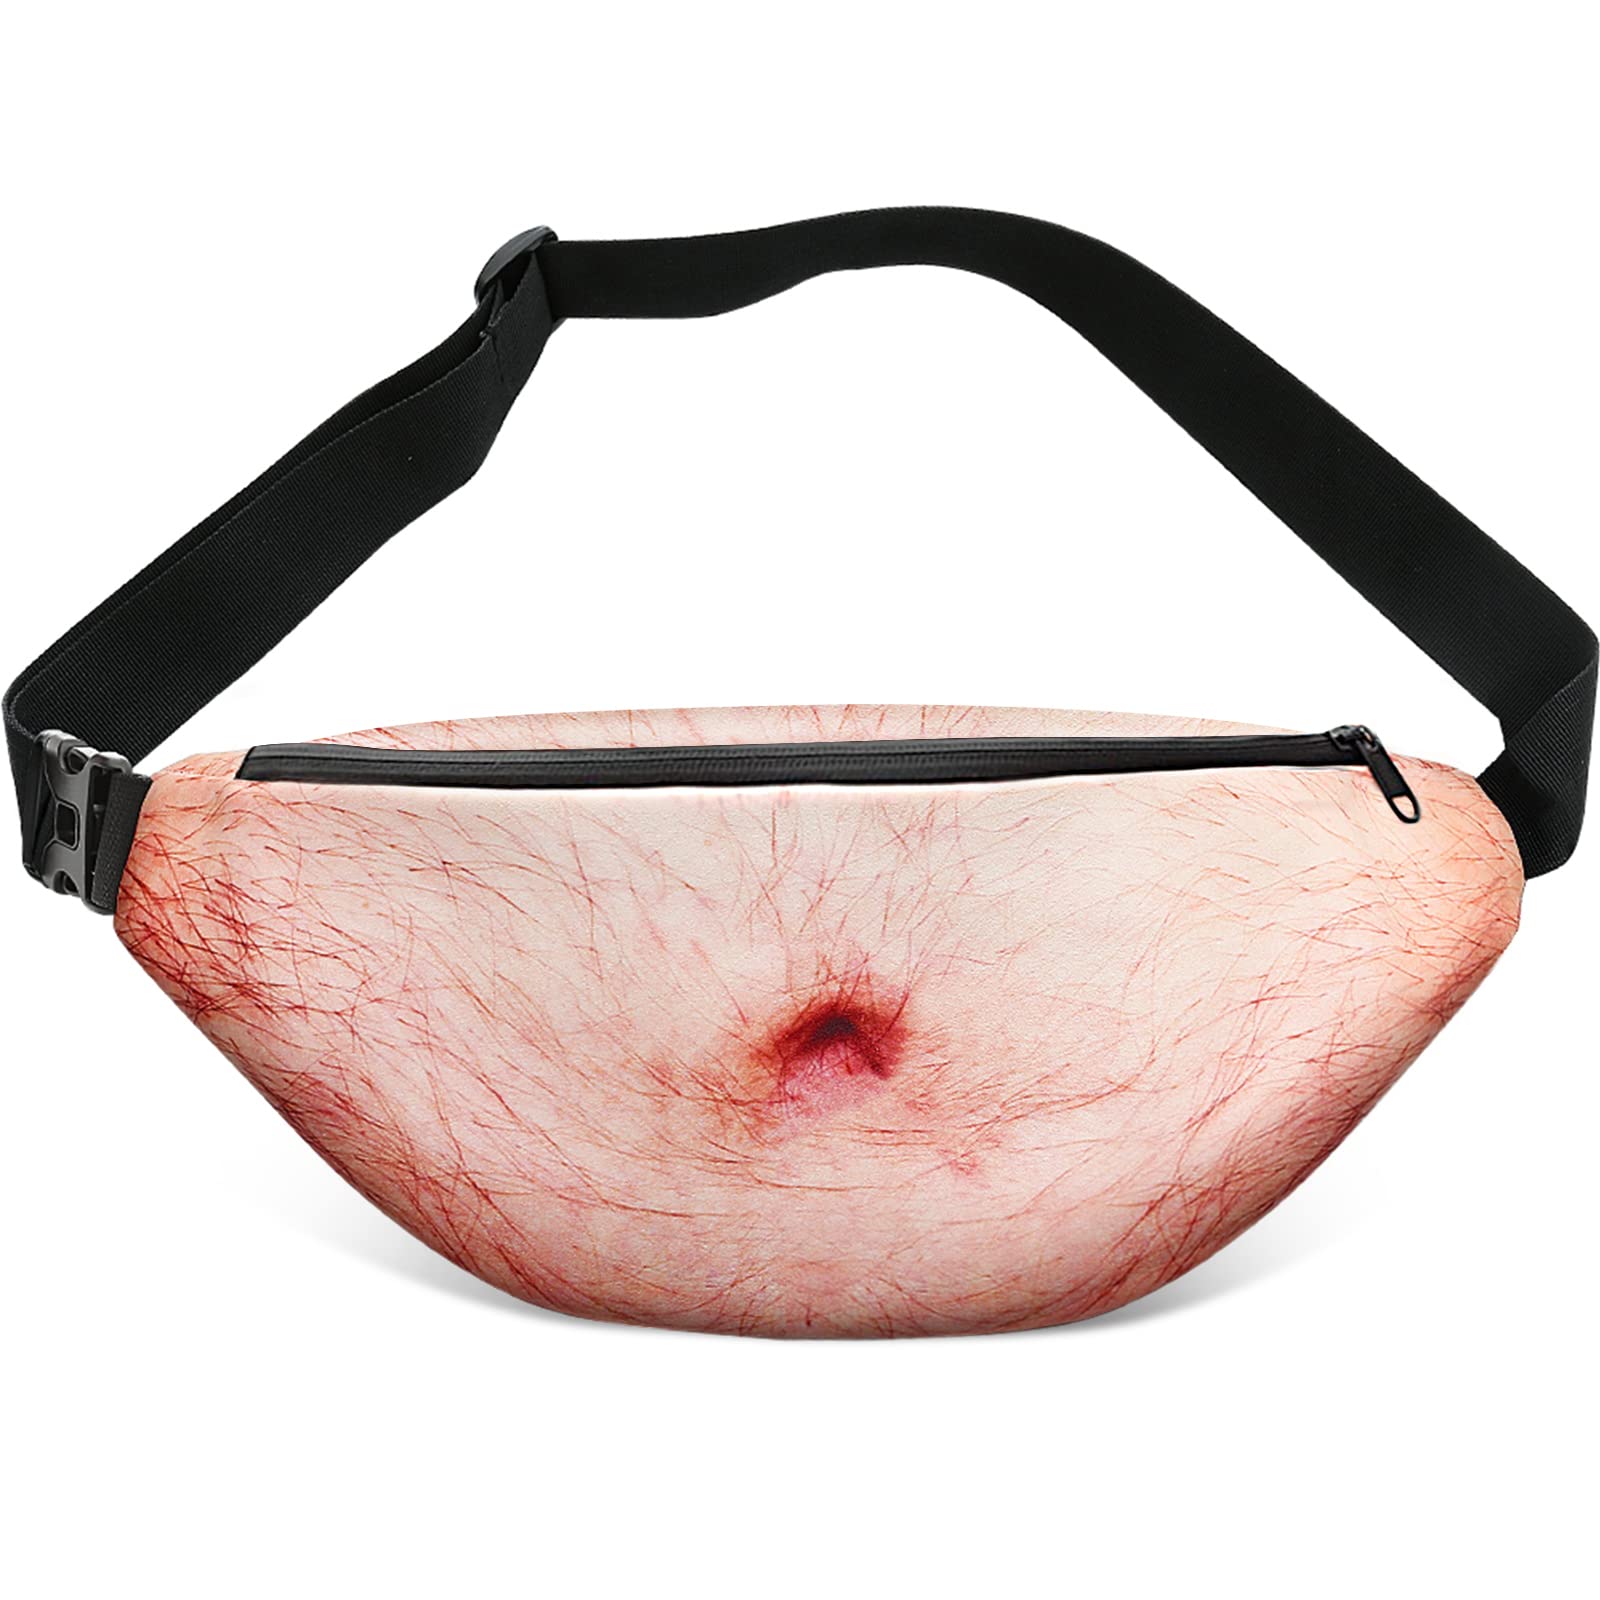 Funny Gag Gifts White Elephant Gift Dad Belly Fanny Pack,Christmas Gag Gifts Exchange,Fake Belly 3D Waist Bag